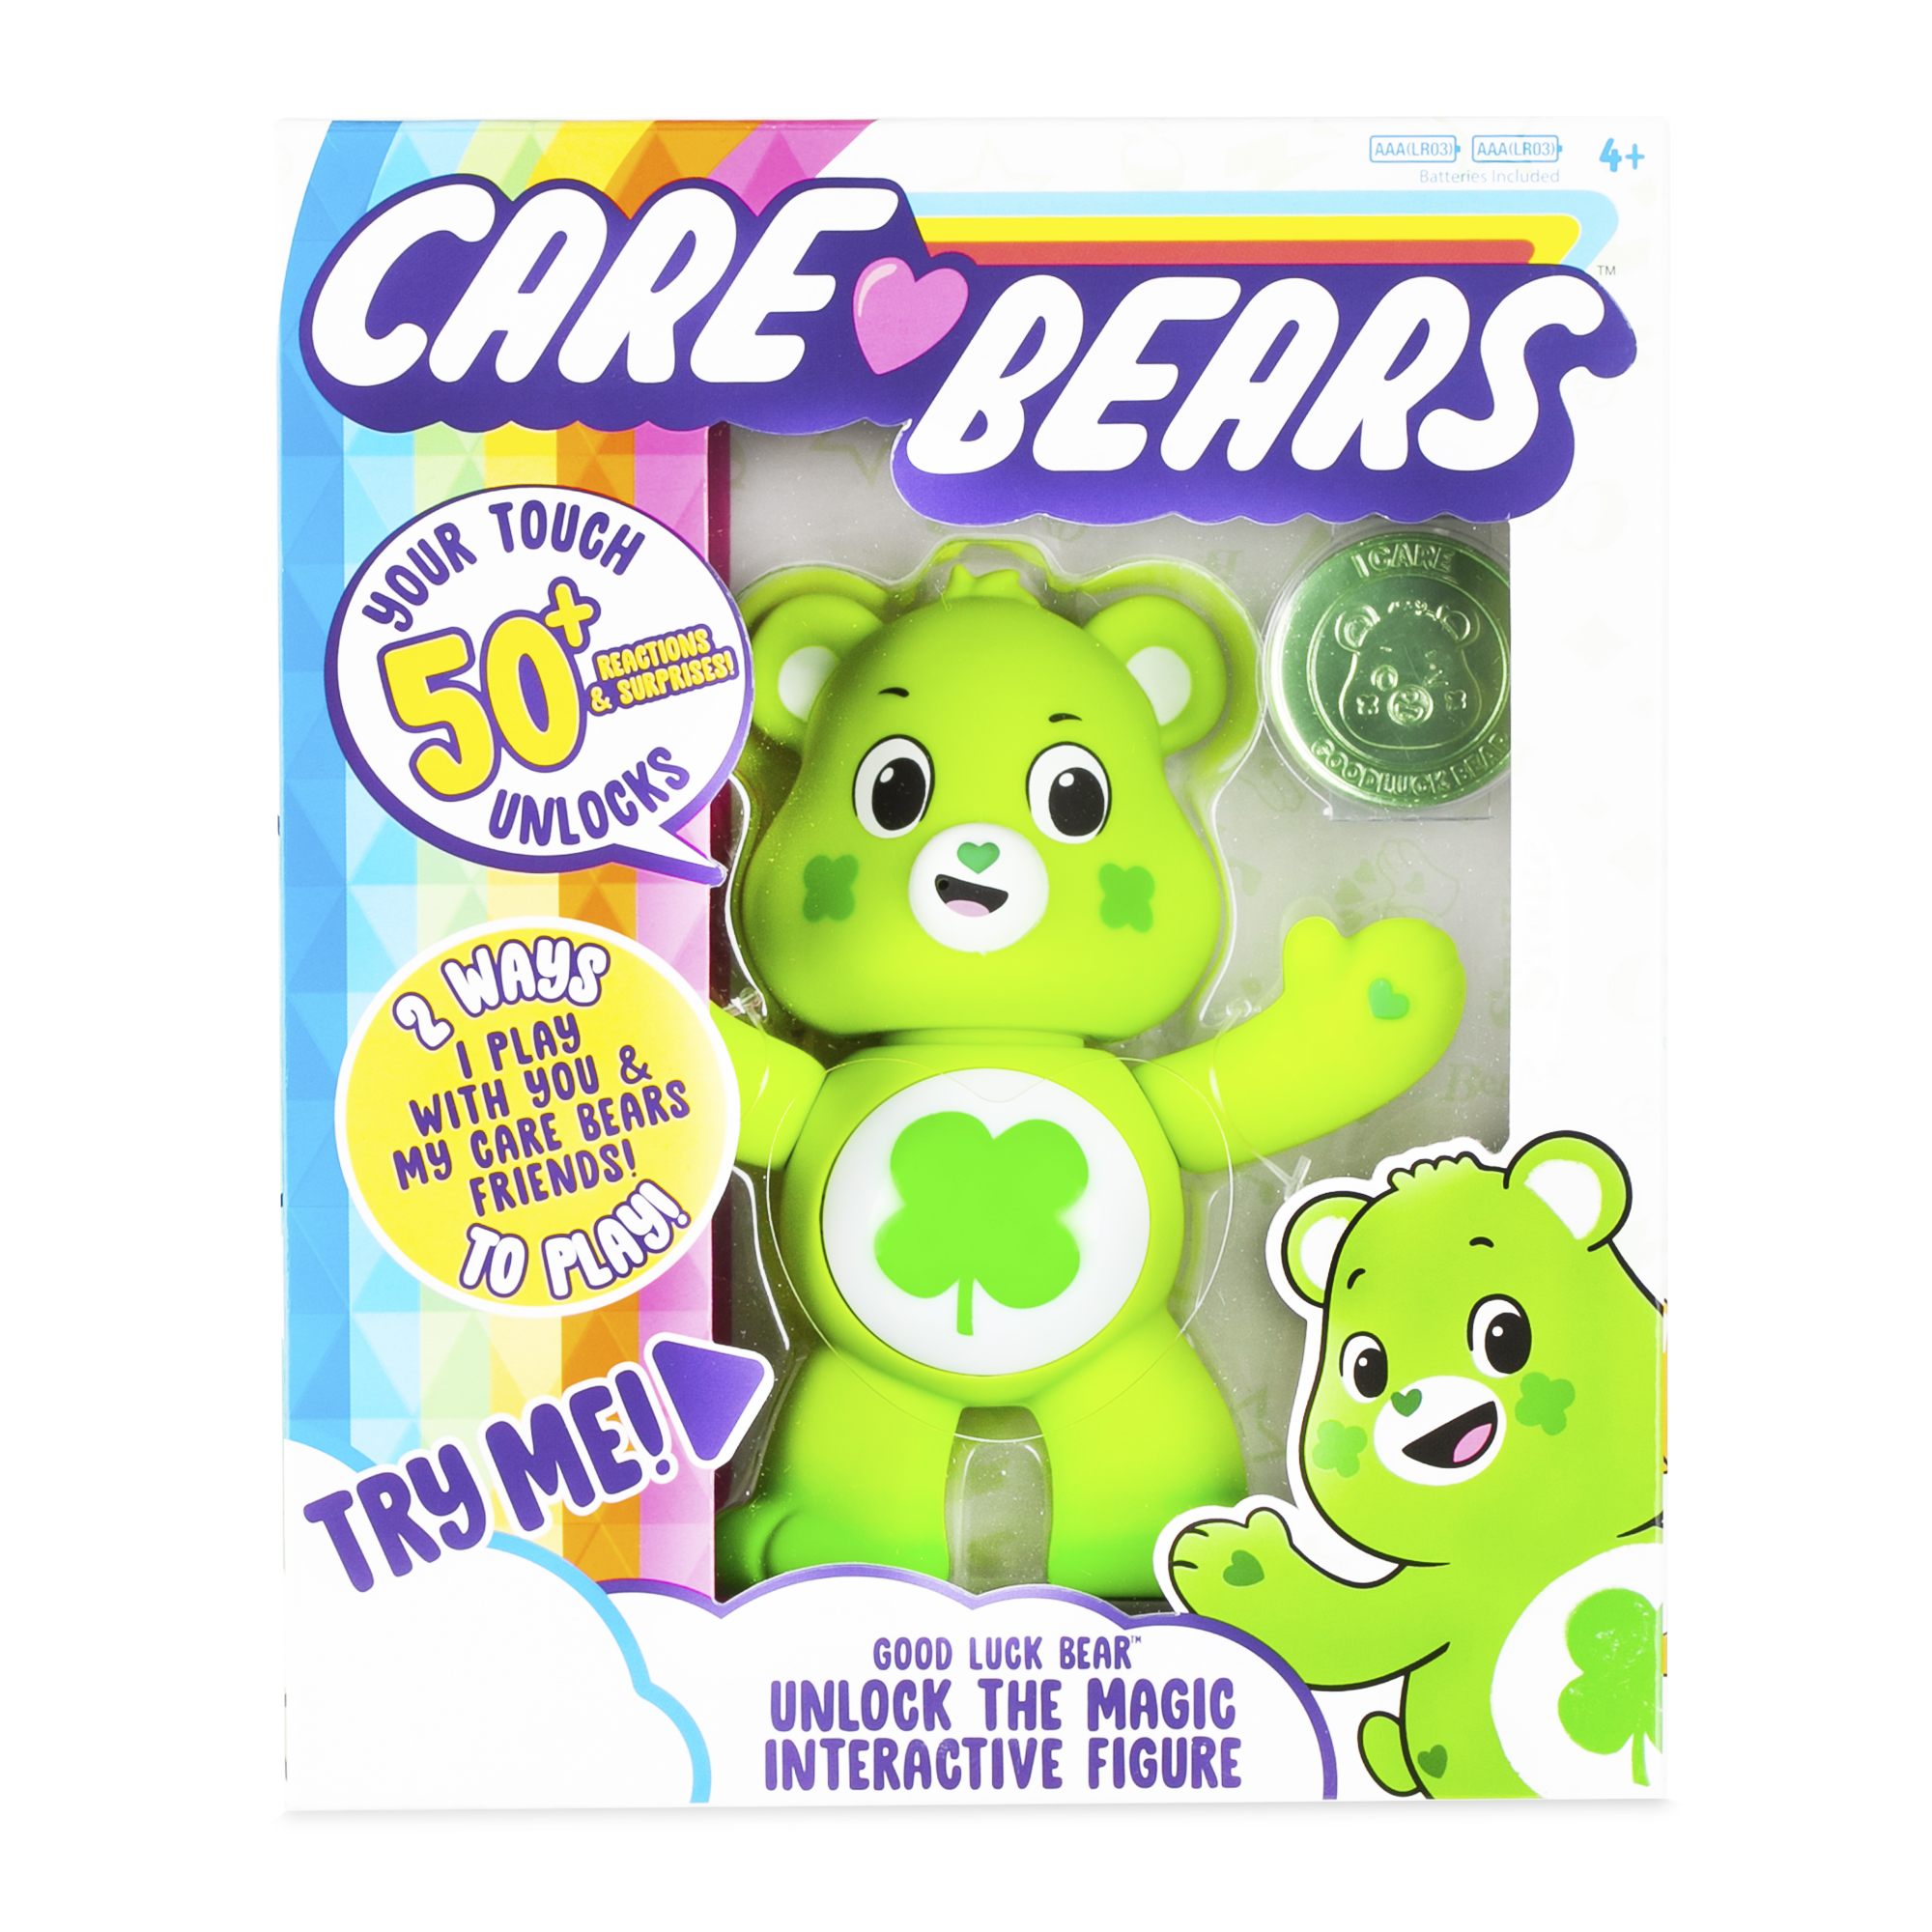 Care Bears - 5" Interactive Figure - Good Luck Bear - Your Touch Unlocks 50+ Reactions & Surprises! - image 1 of 12